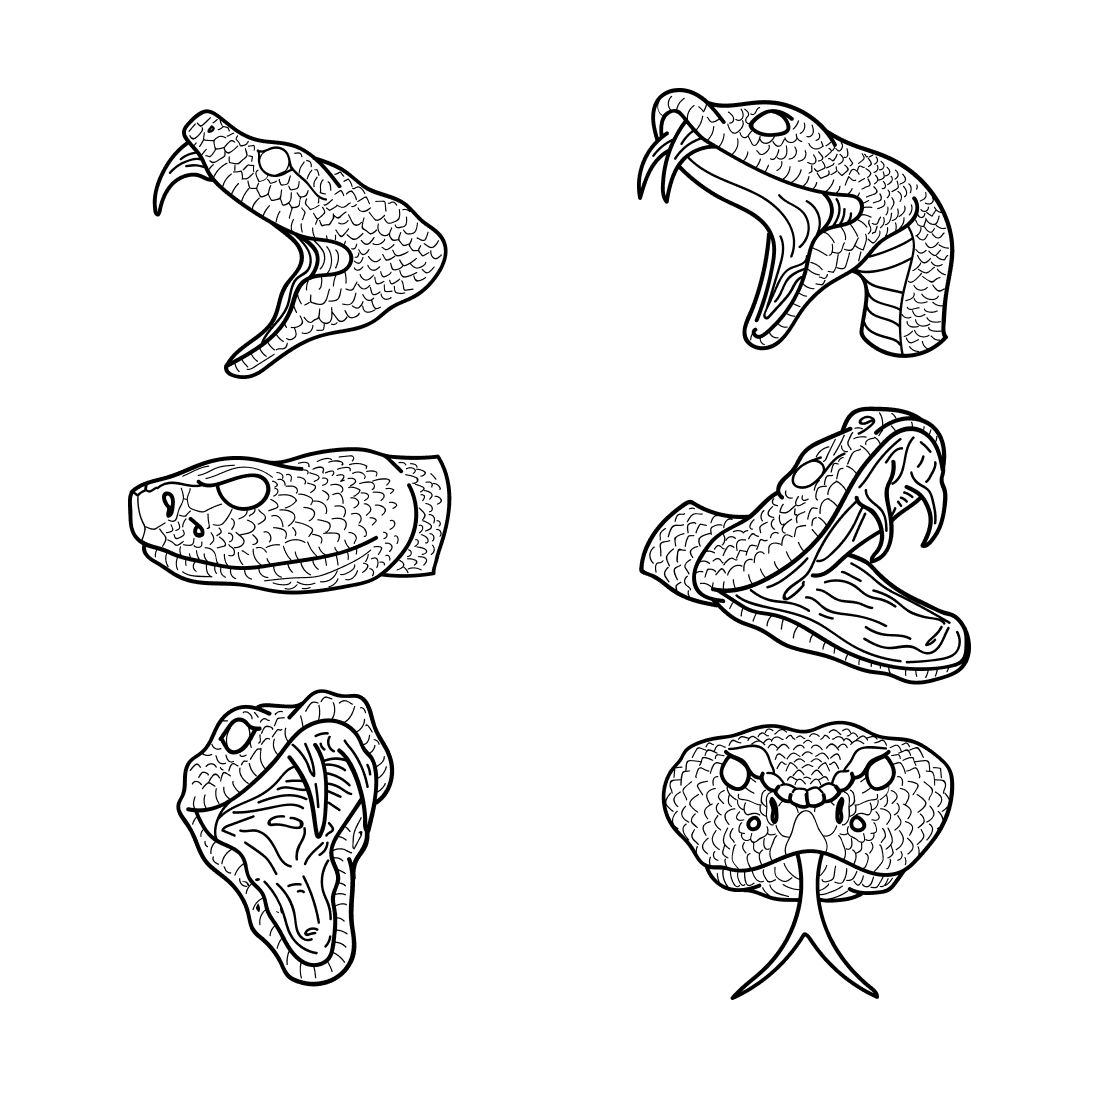 Set of four different types of snakes.